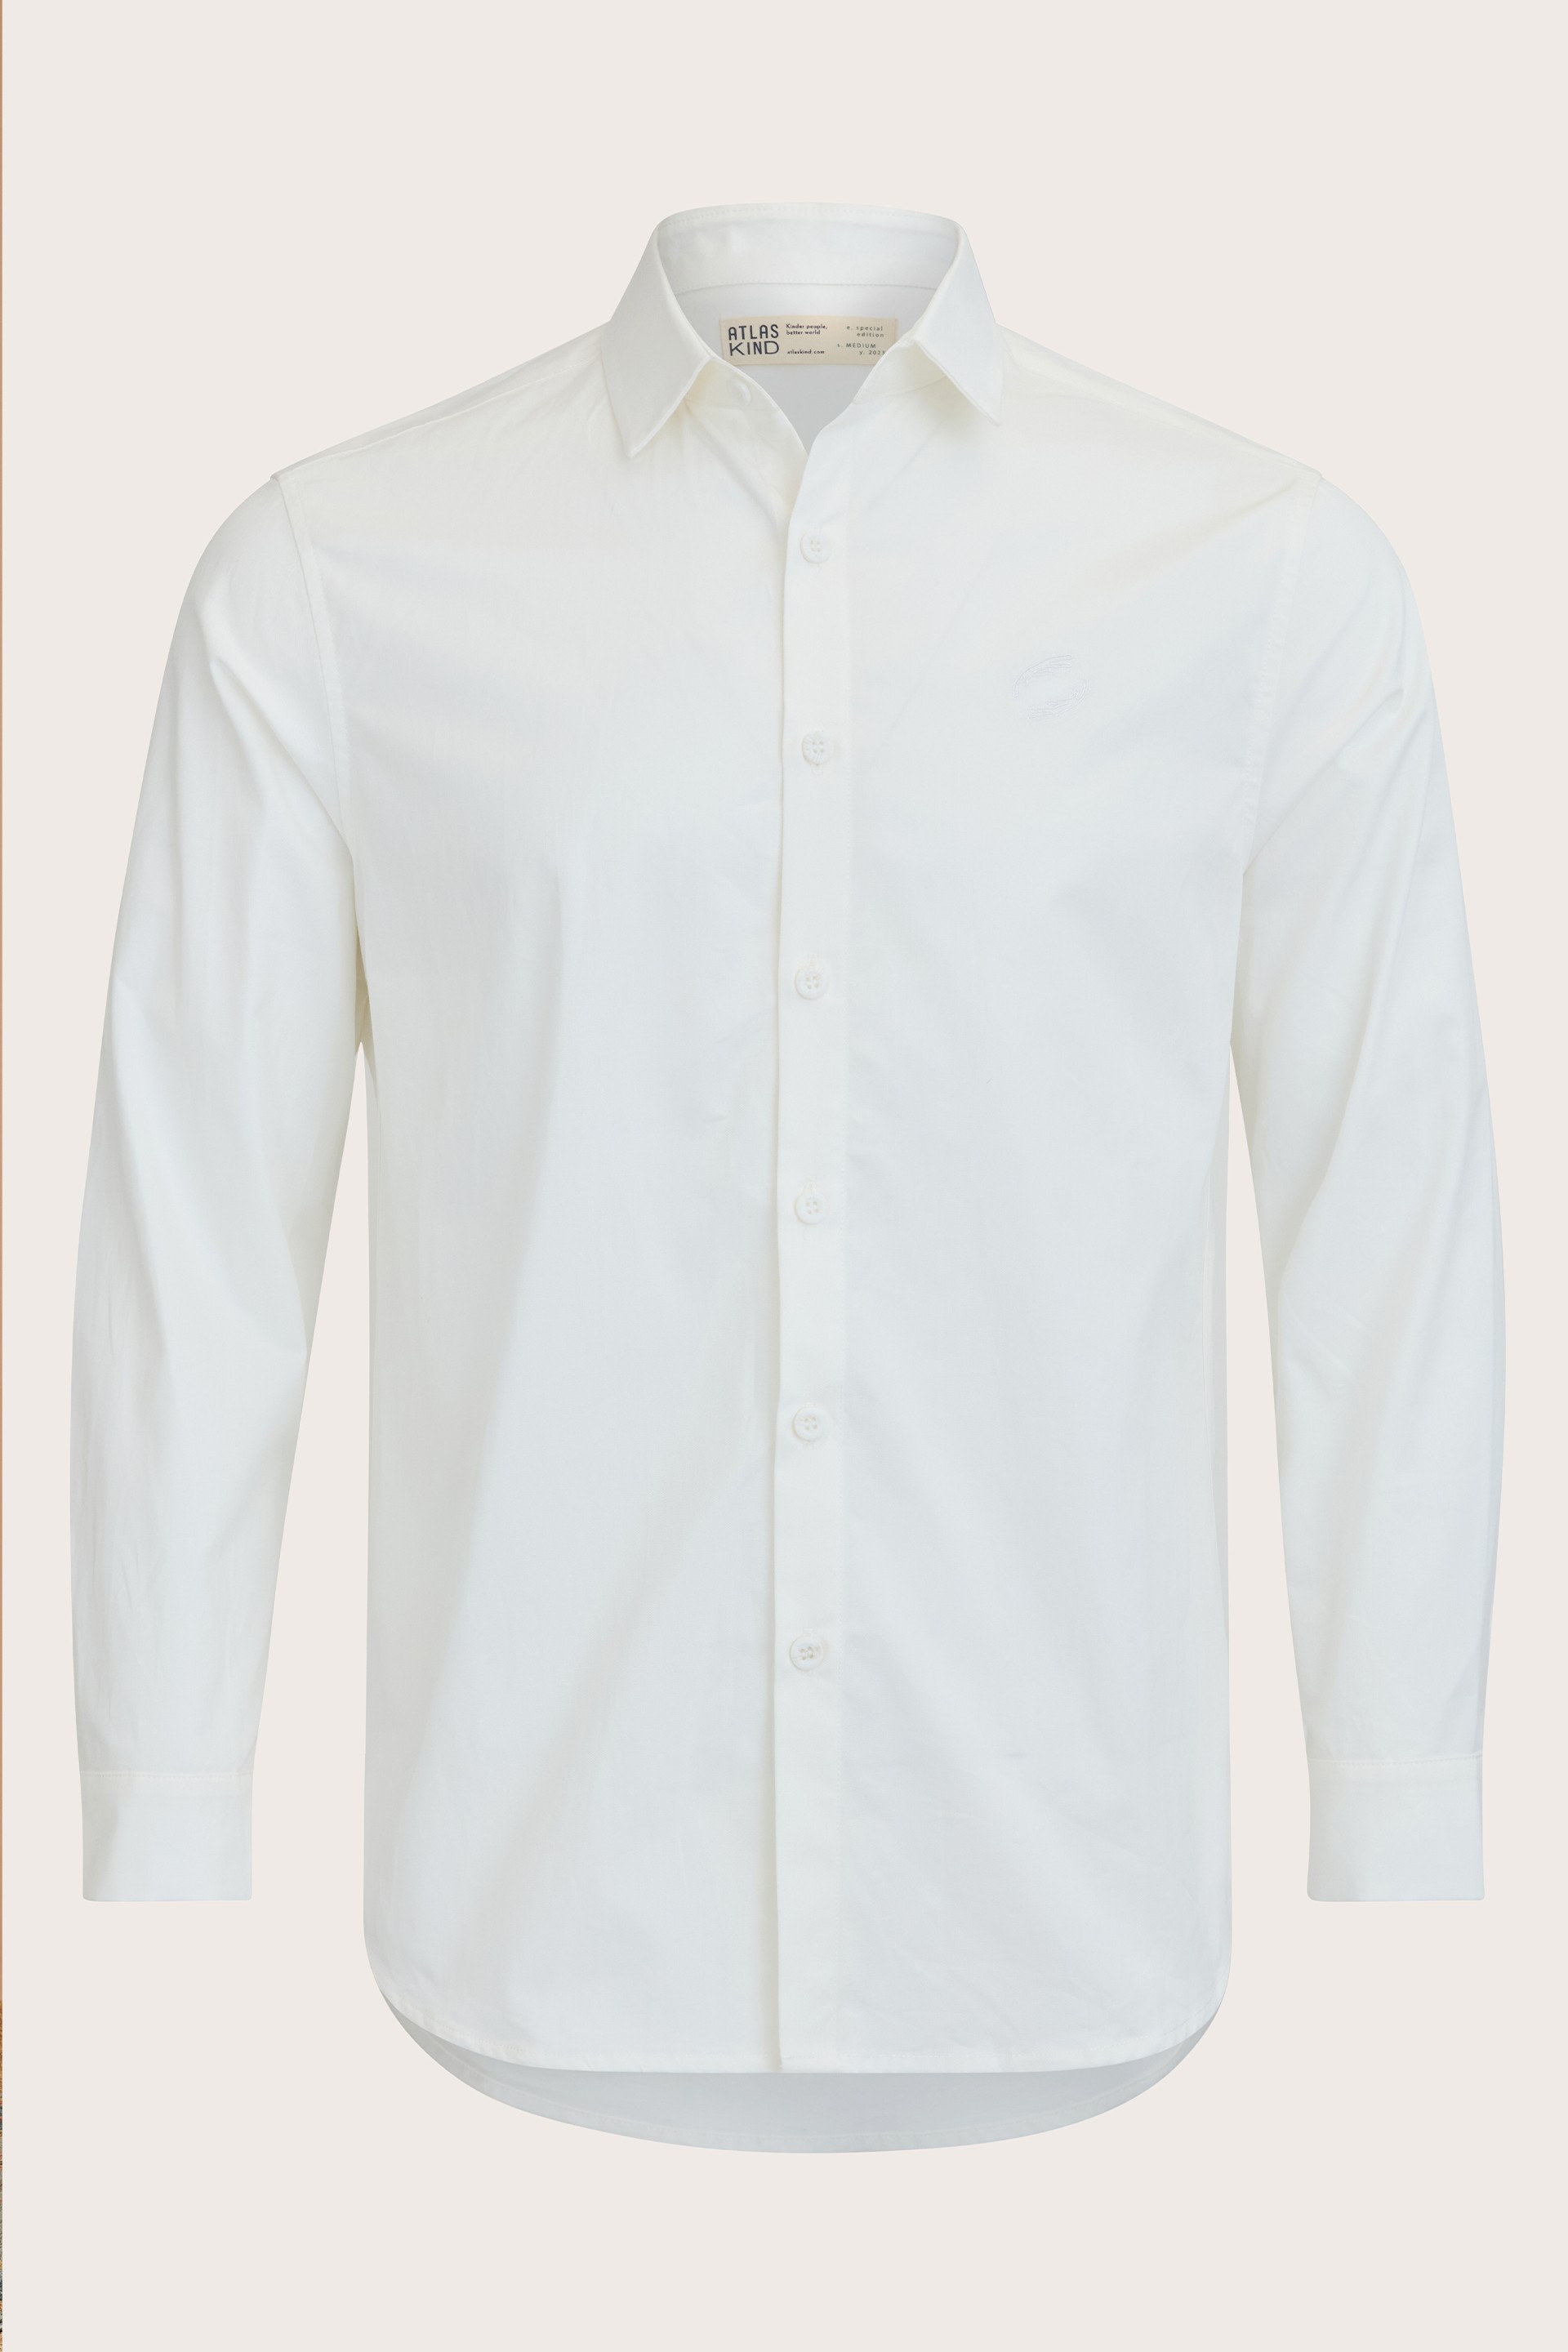 Kinder People Collared Cotton Shirt